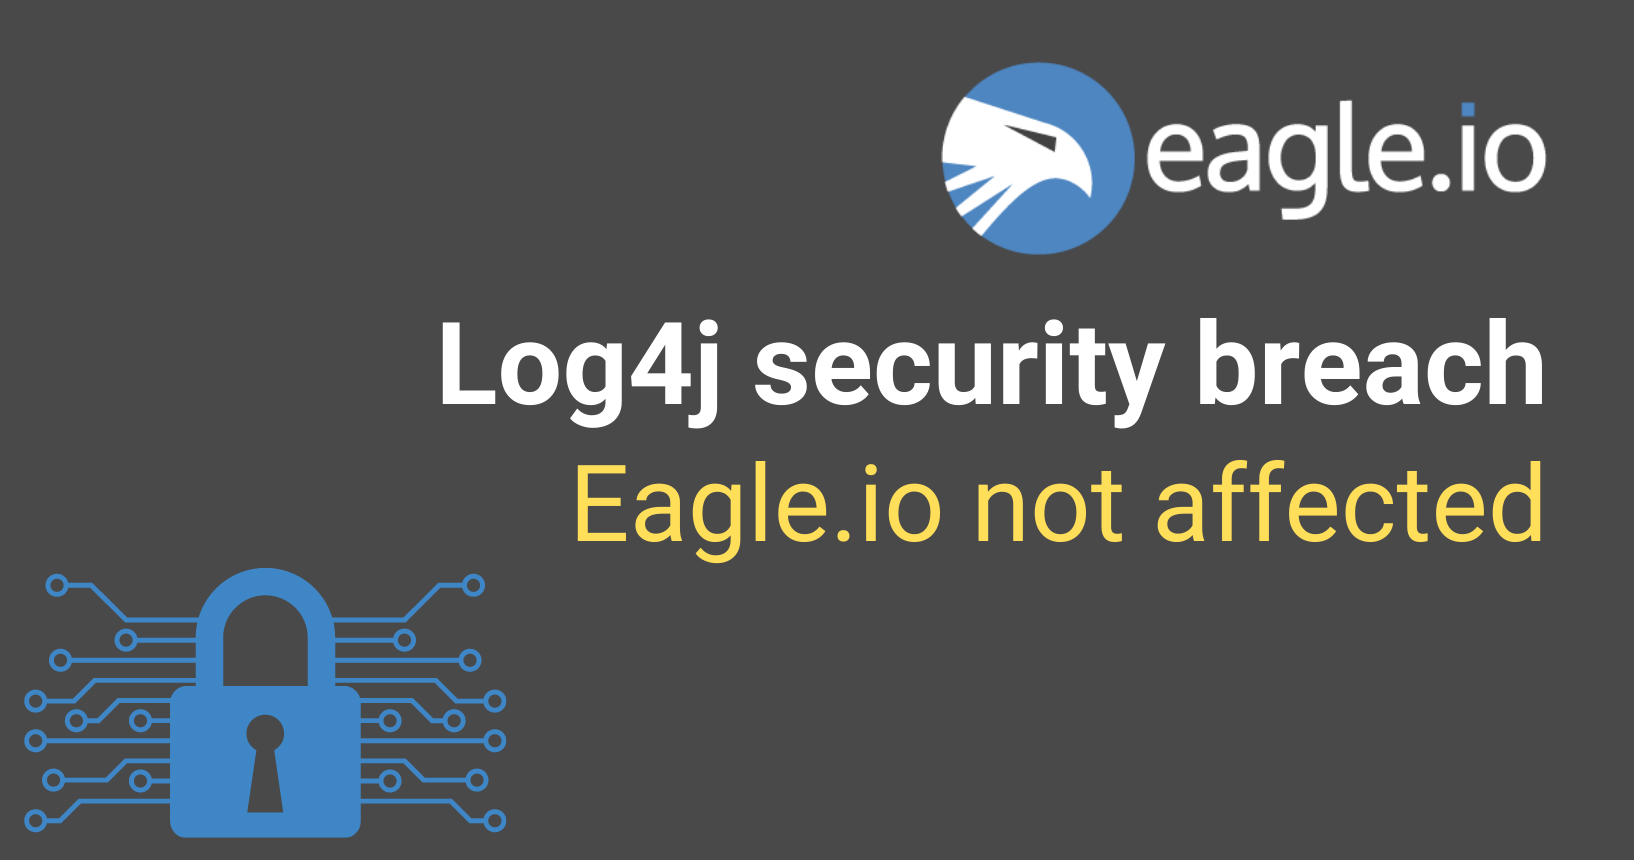 Eagle.io not affected by Log4j security breach